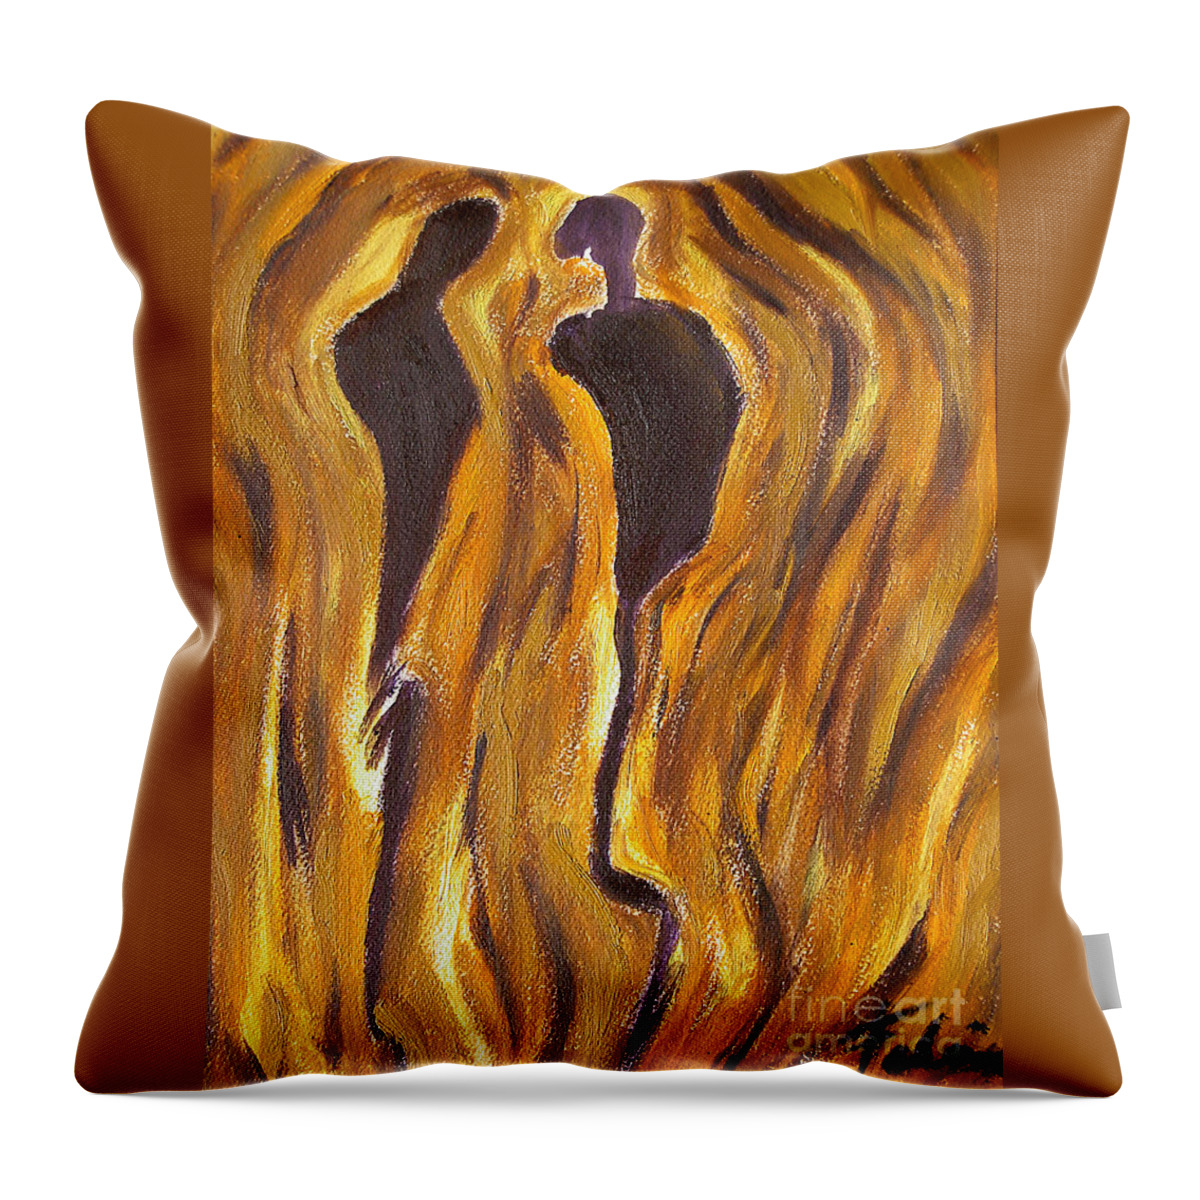 Conversation Throw Pillow featuring the painting Conversation by Will Felix